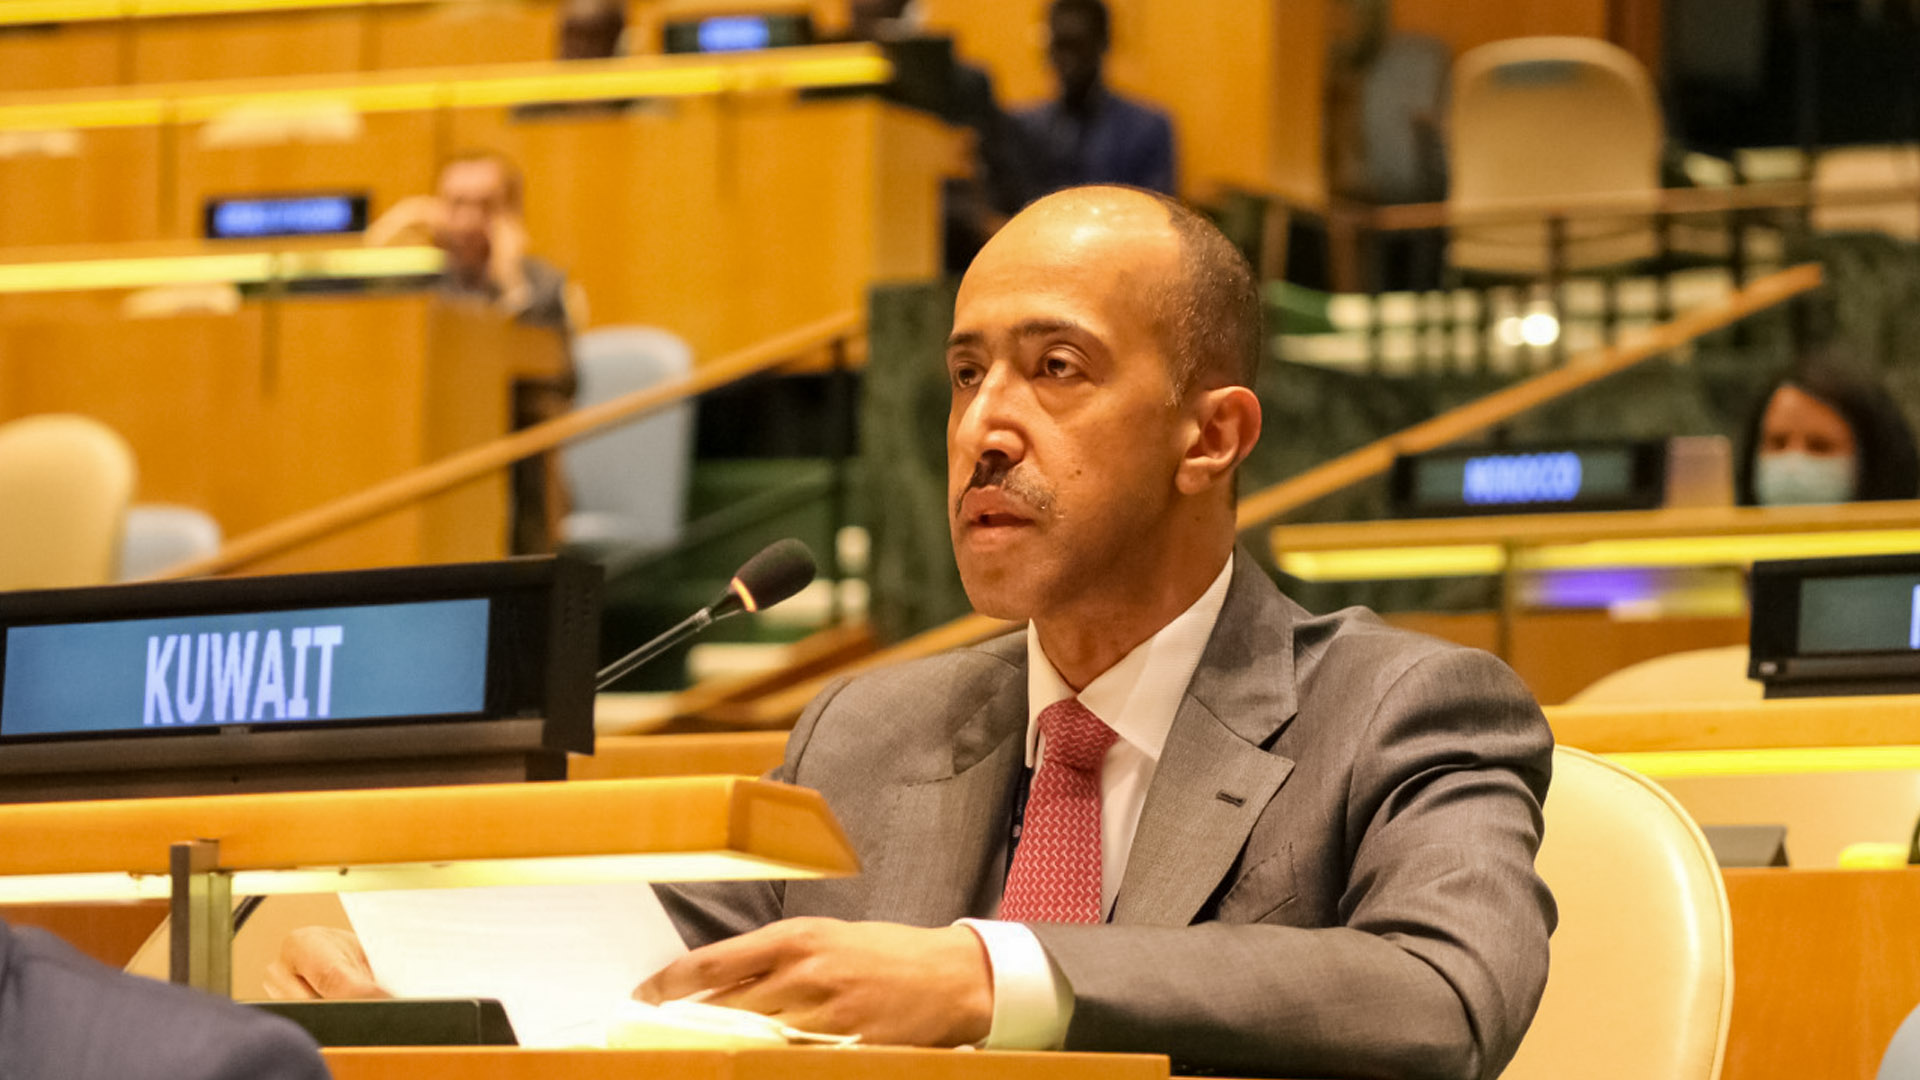 Kuwait welcomes the exceptional UN veto resolution